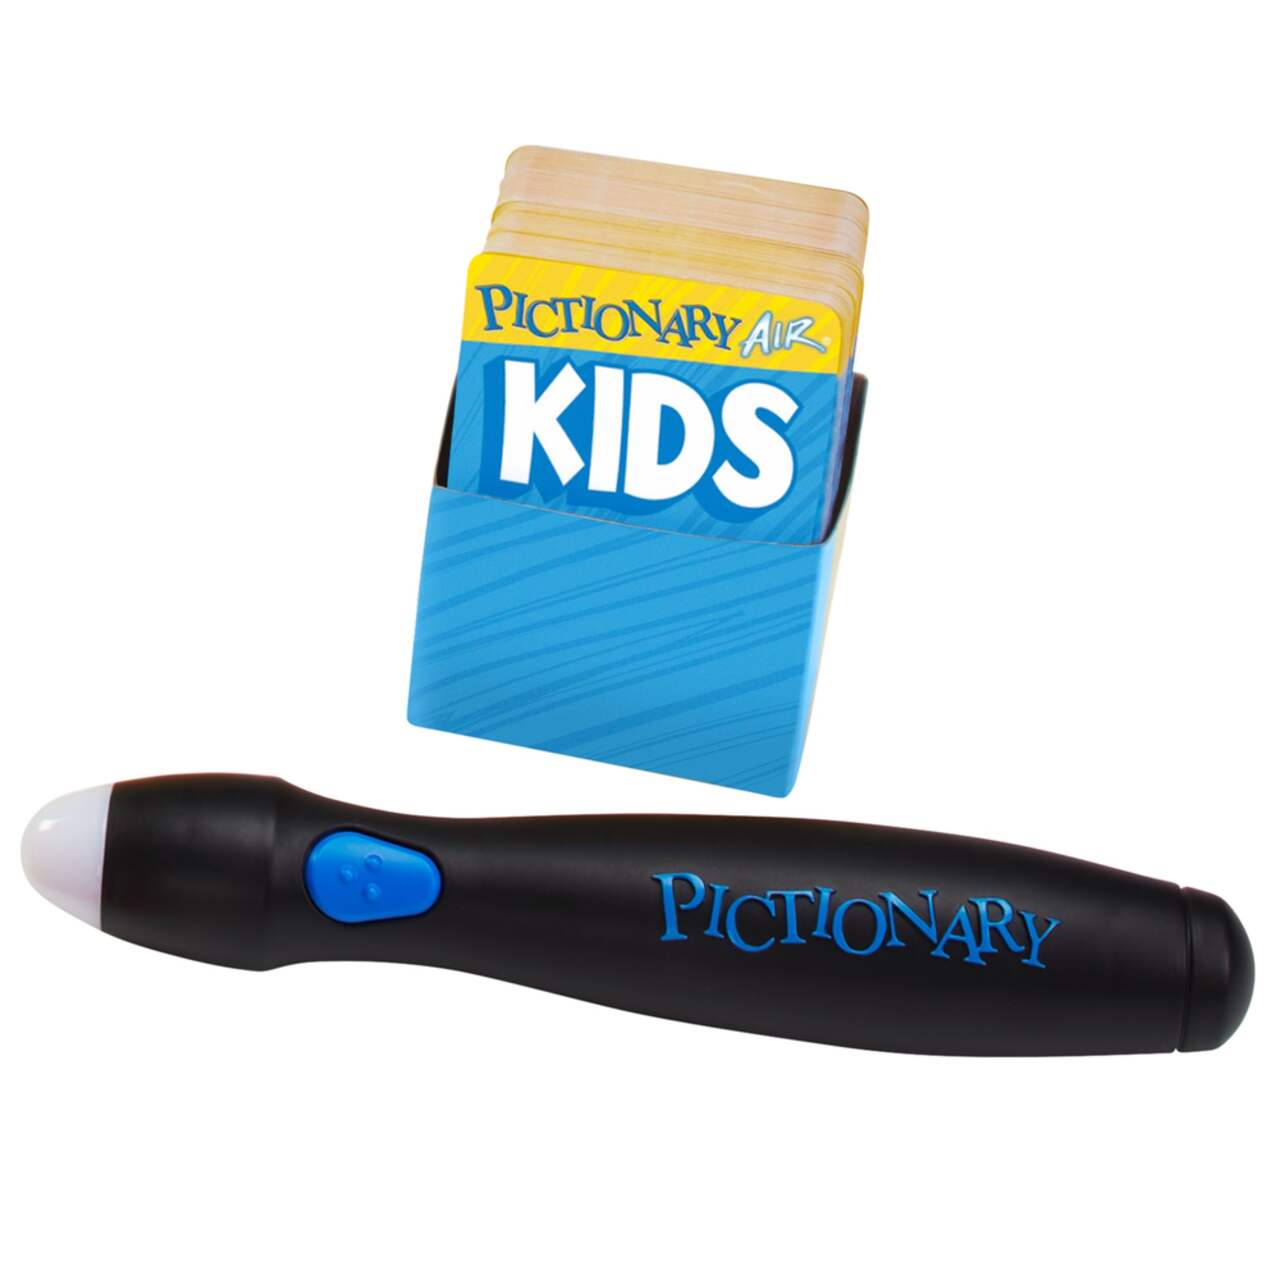 Pictionary Air 2 Family Game for Kids & Adults with Upgraded Light Pen &  Digital Clue Packs